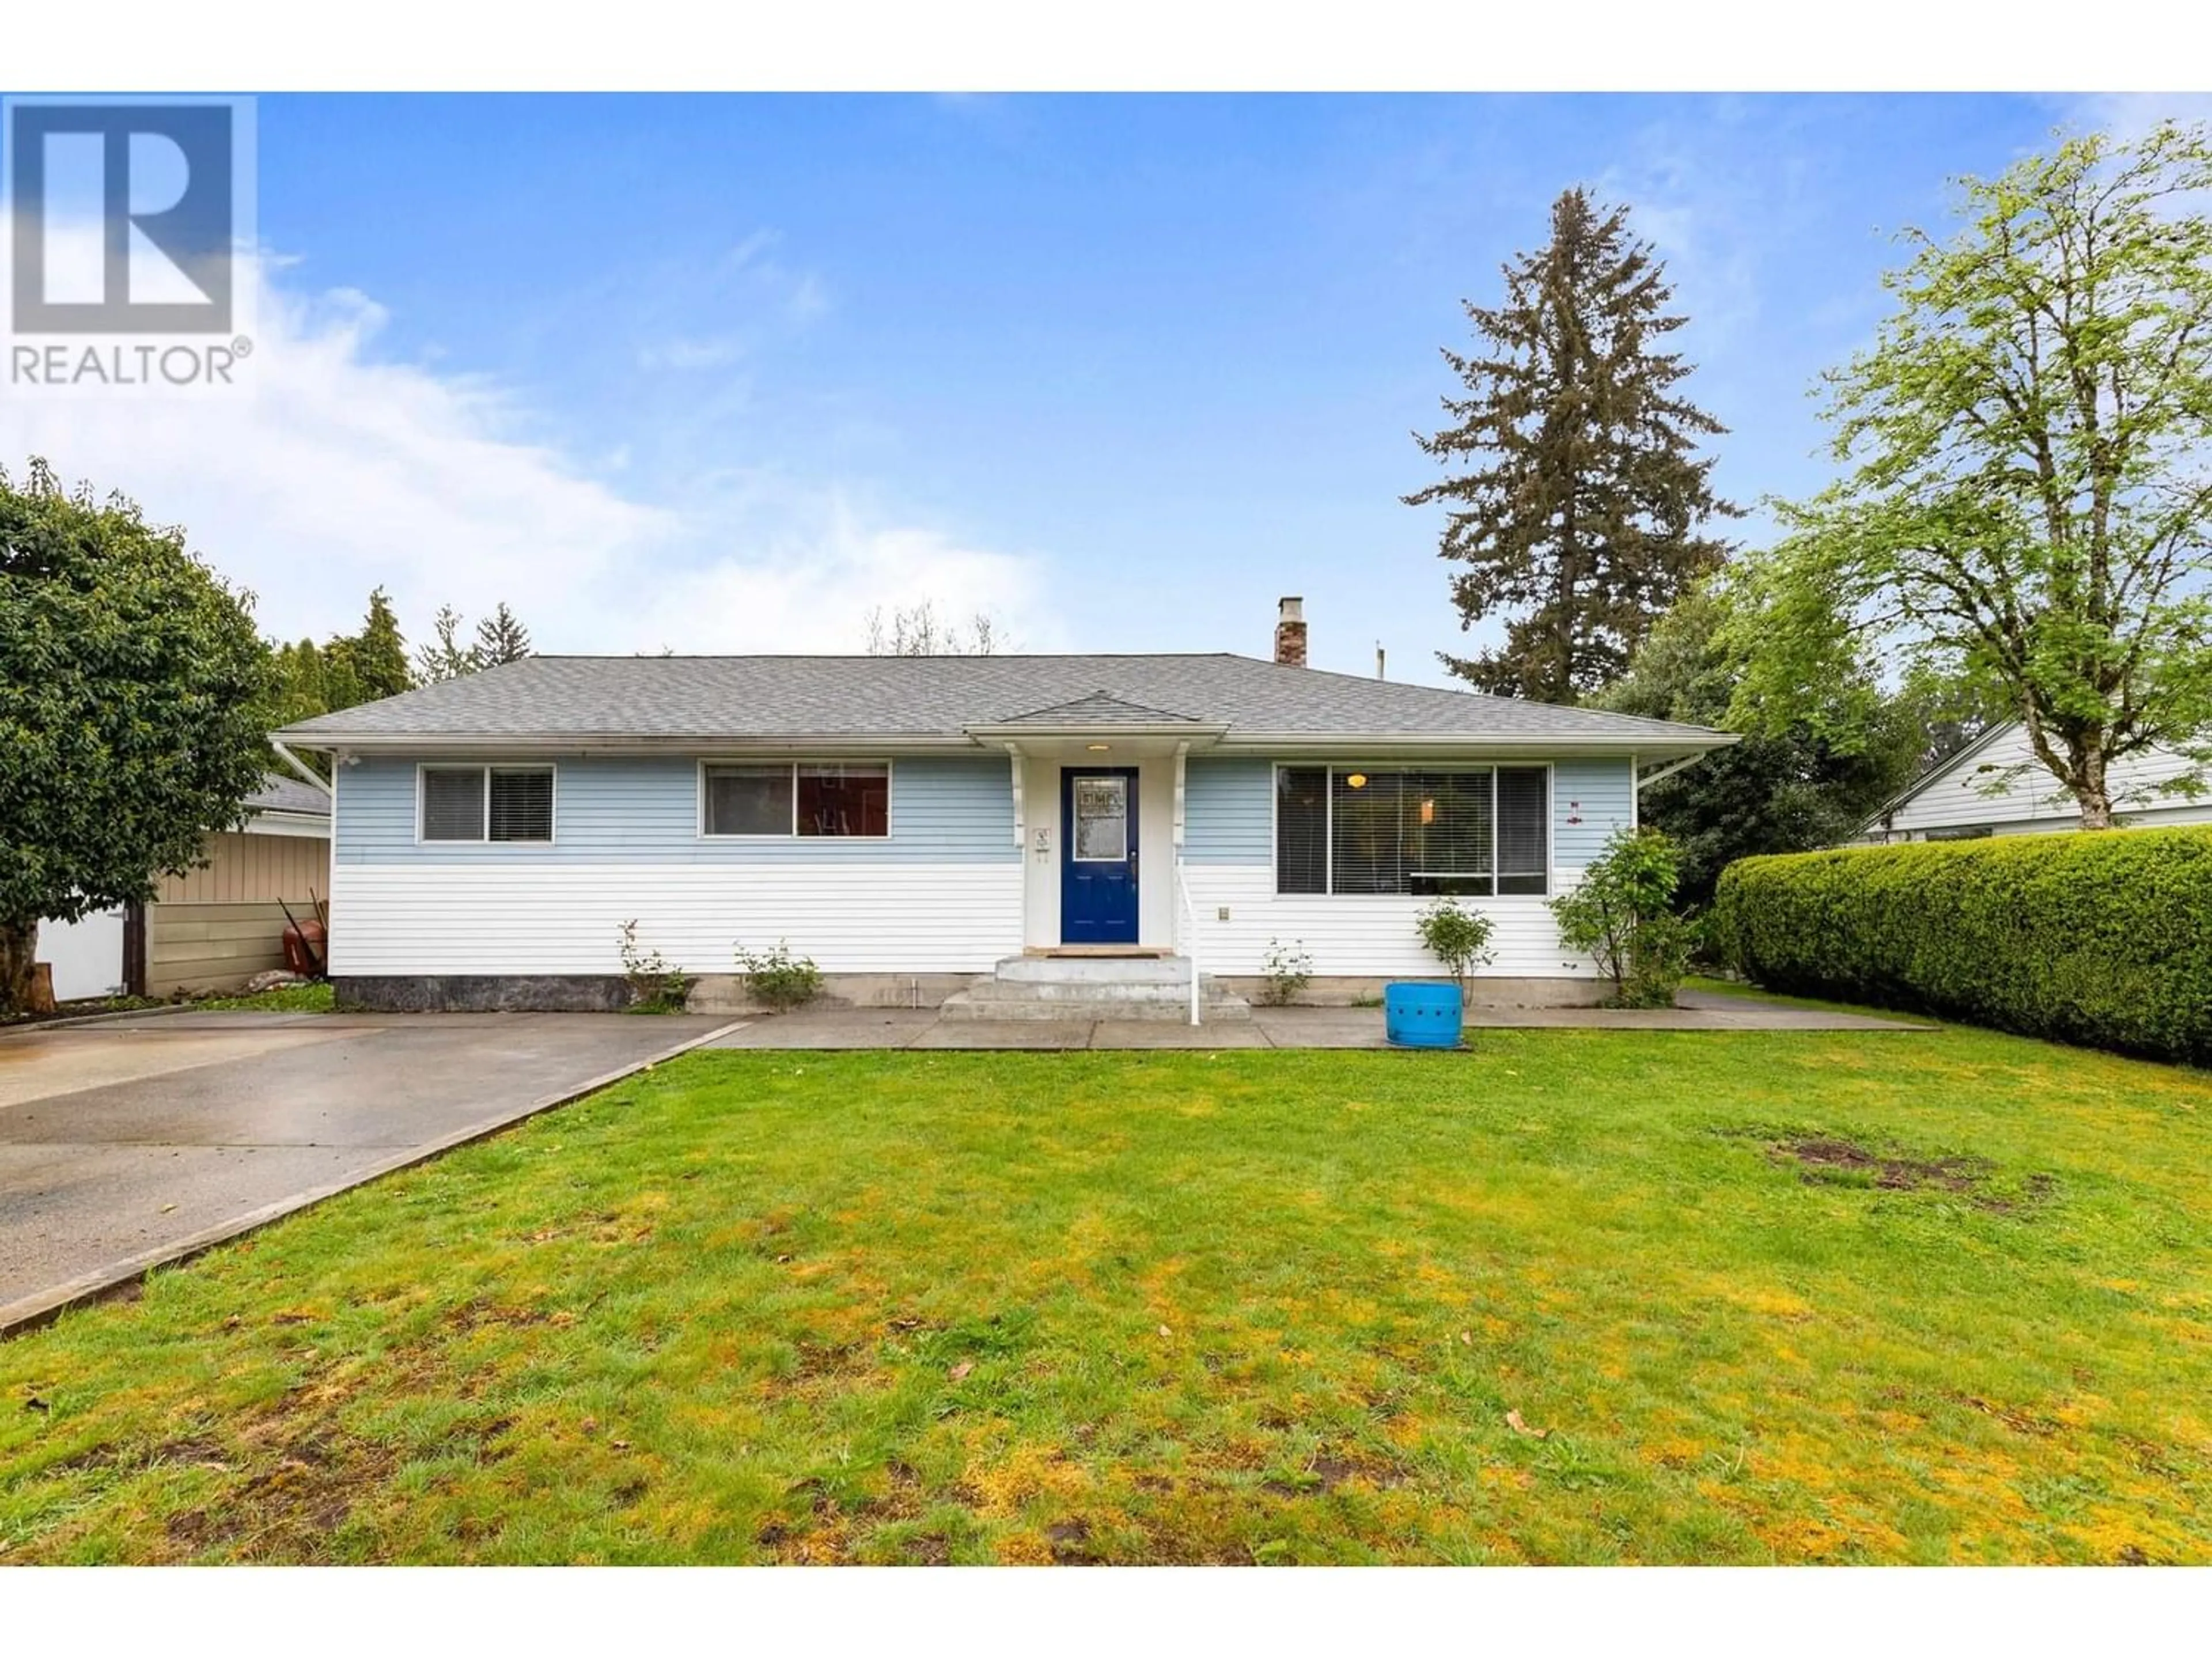 Frontside or backside of a home for 22128 119 AVENUE, Maple Ridge British Columbia V2X2Y8